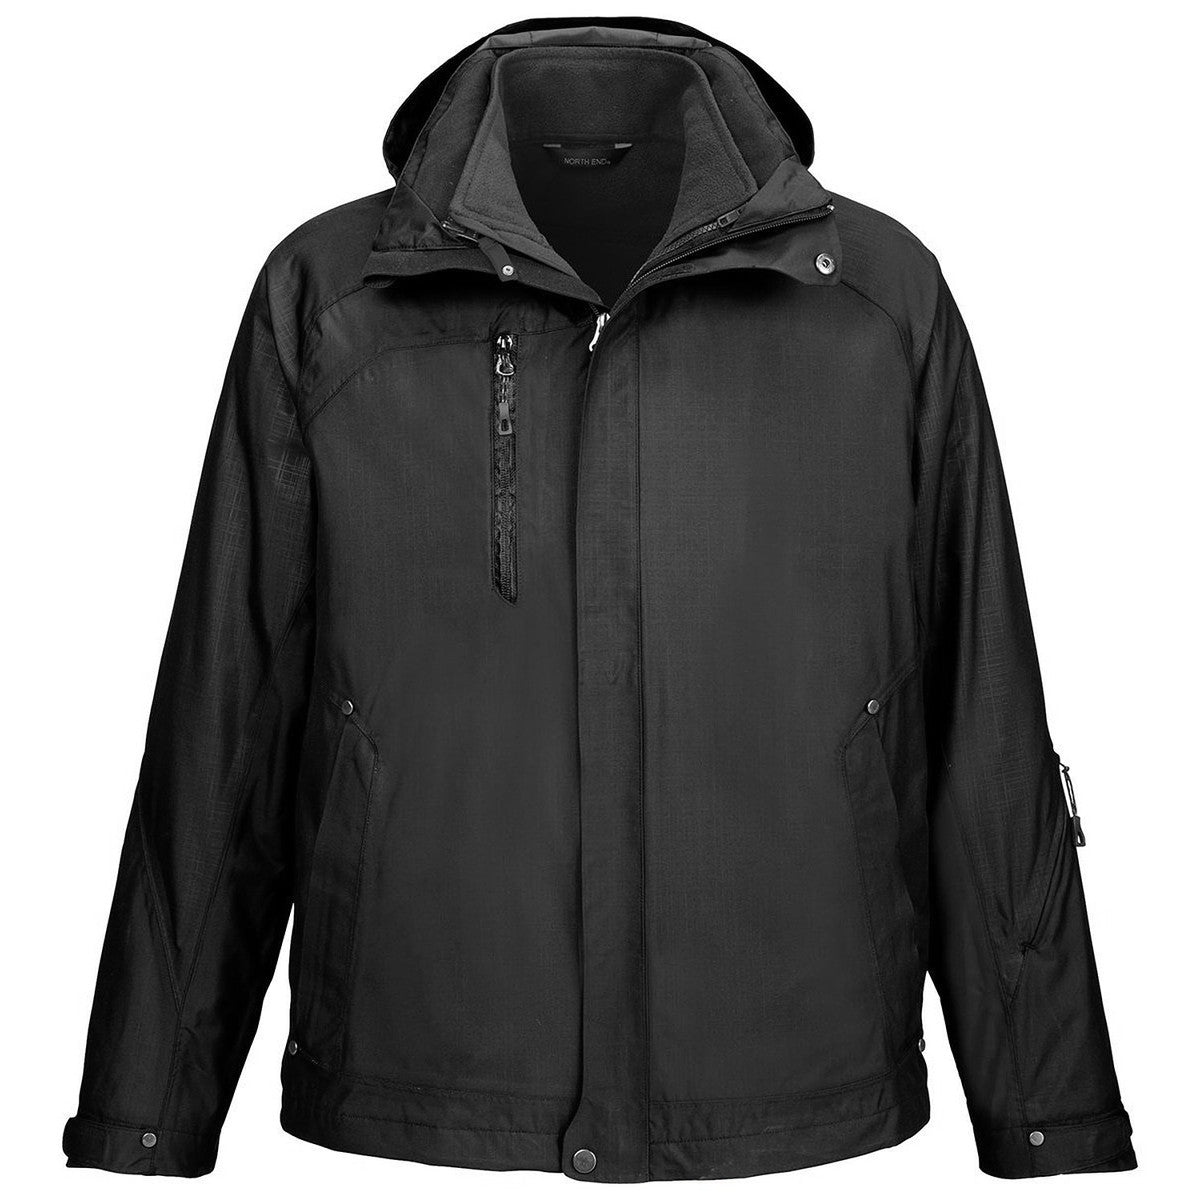 Jolly Slot Menda City North End Men's Black Caprice 3-In-1 Jacket with Soft Shell Liner